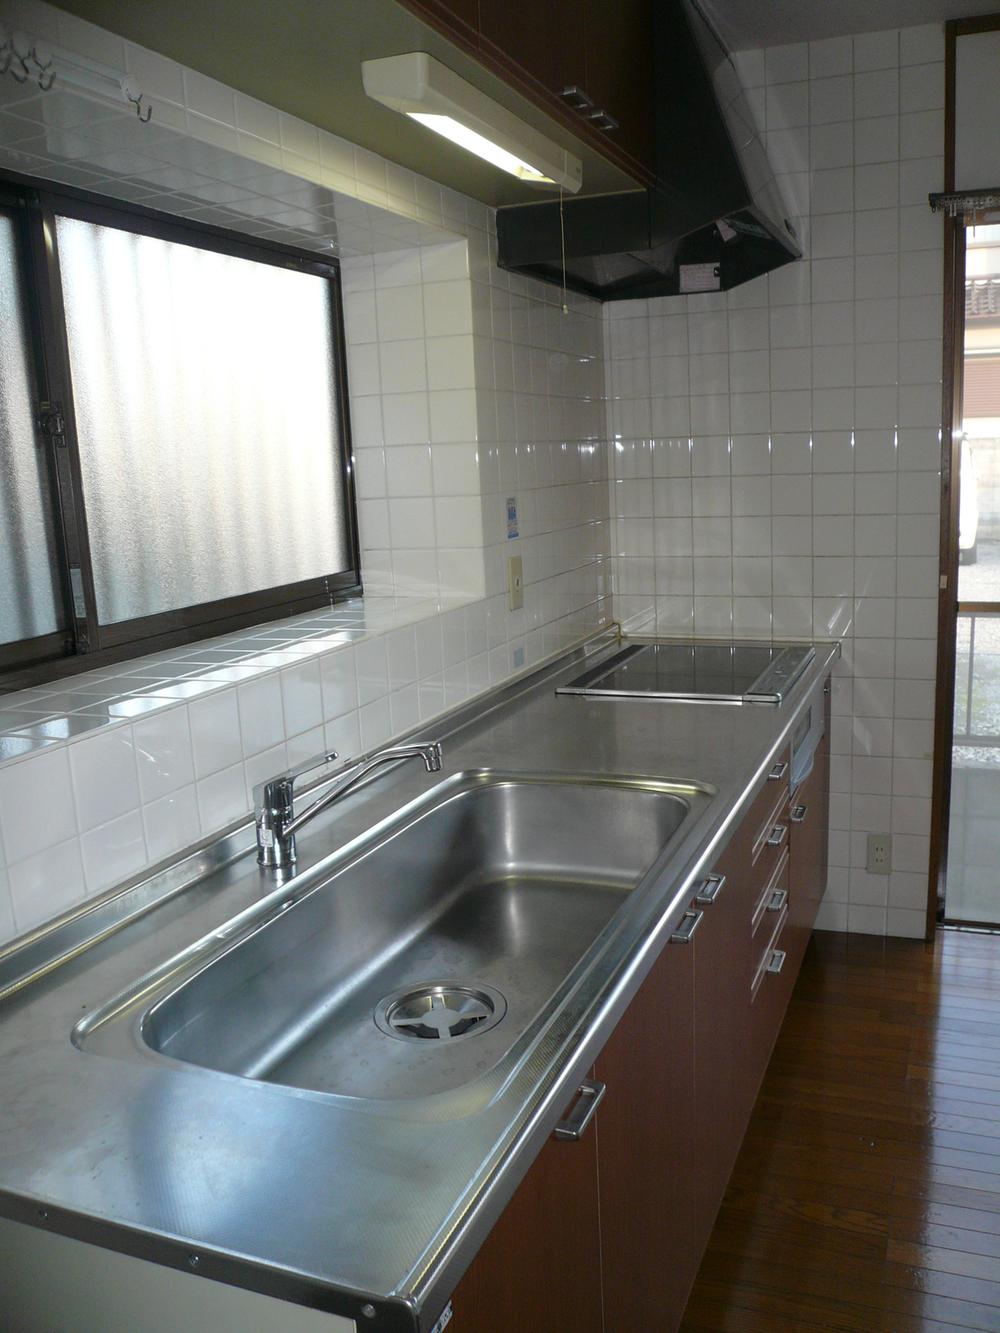 Kitchen. It is a large system Kitchen.